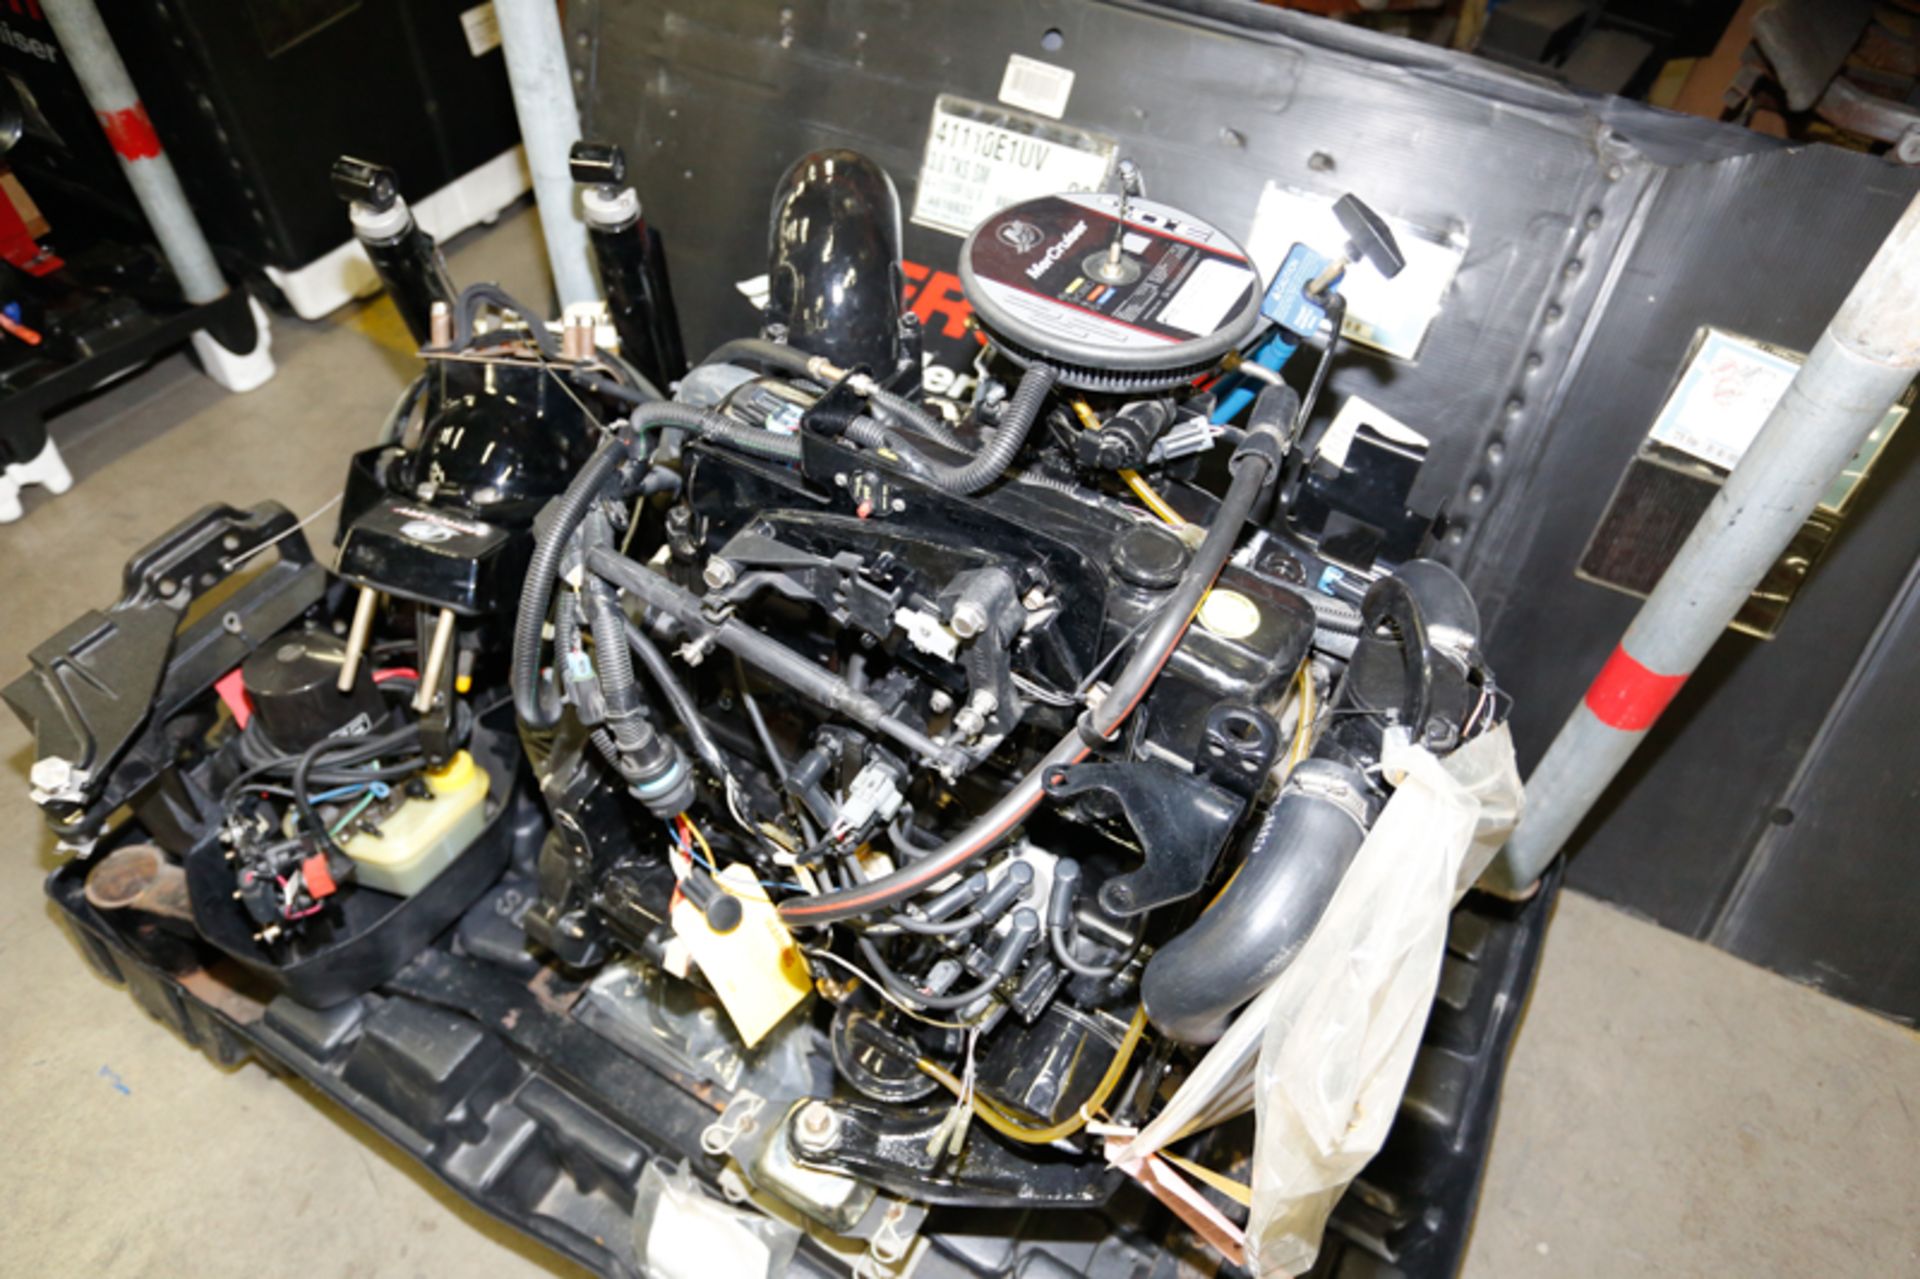 NEW - MERCRUISER INBOARD ENGINE 3.0 TKS, ALPHA 1 TRANSOM (NEW IN CRATE) - Image 2 of 3